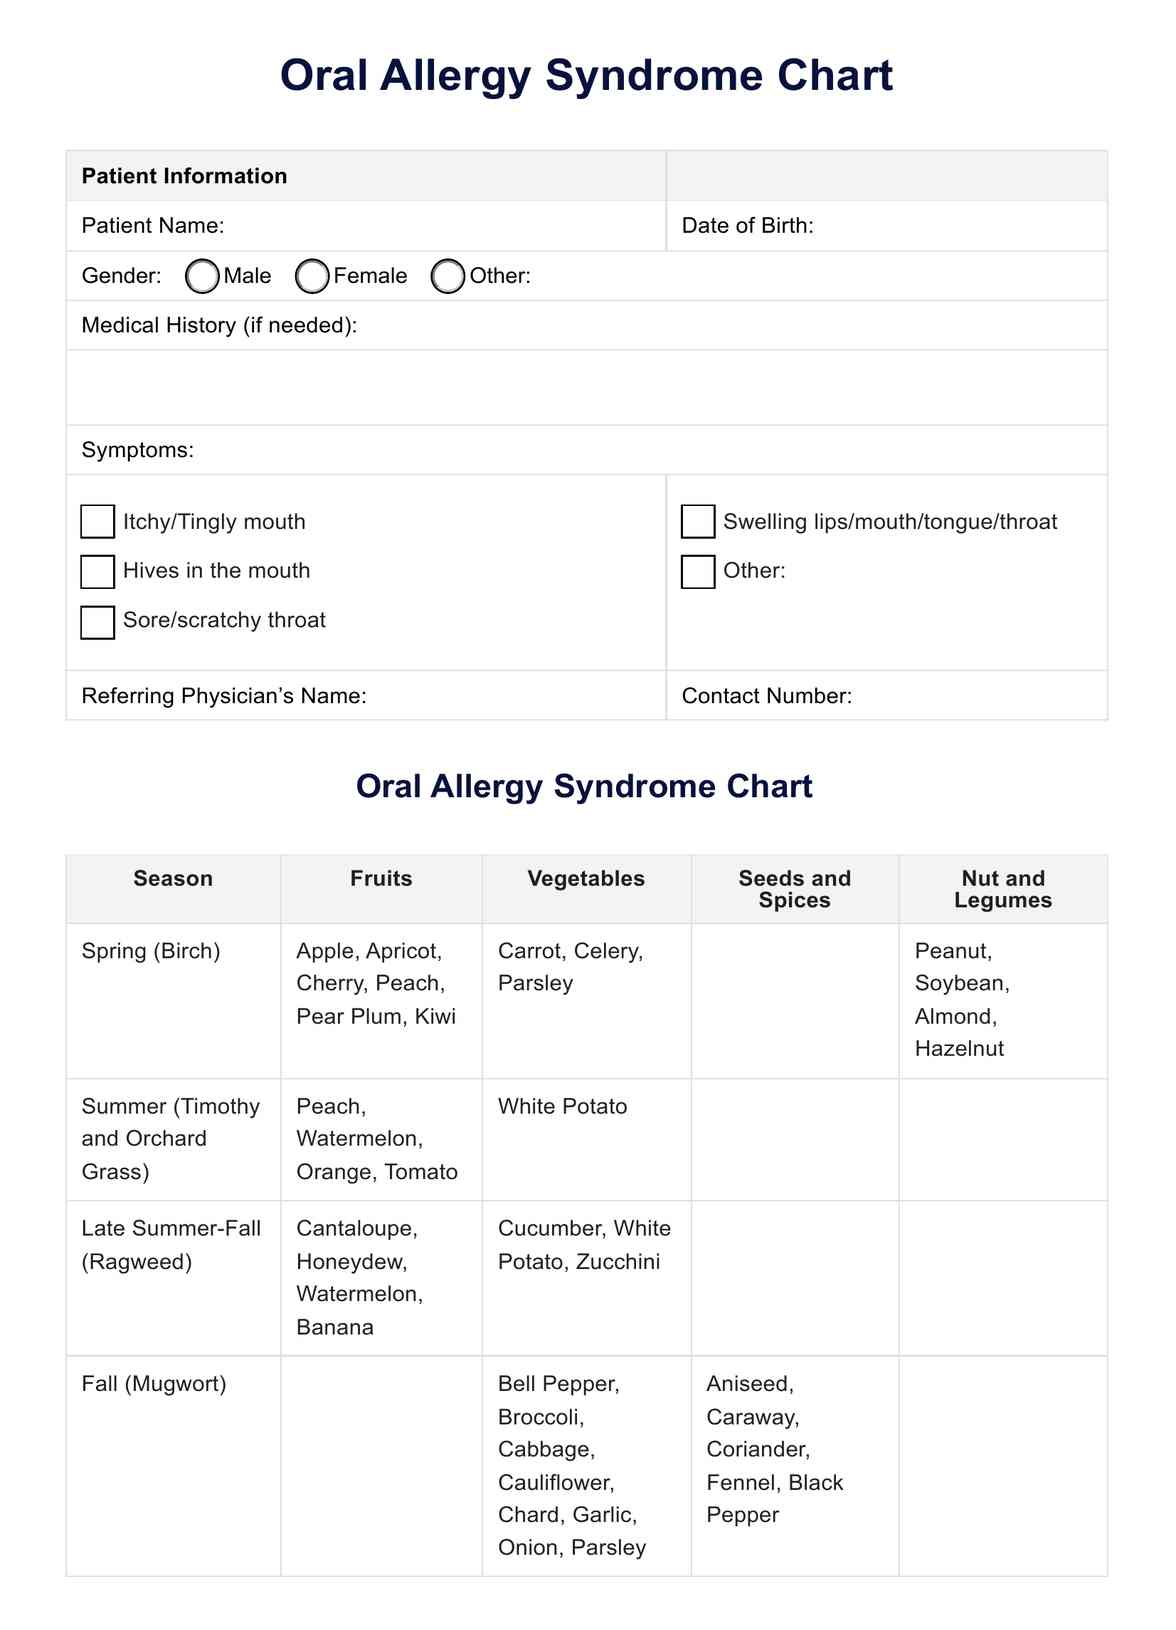 Oral Allergy Syndrome Chart PDF Example